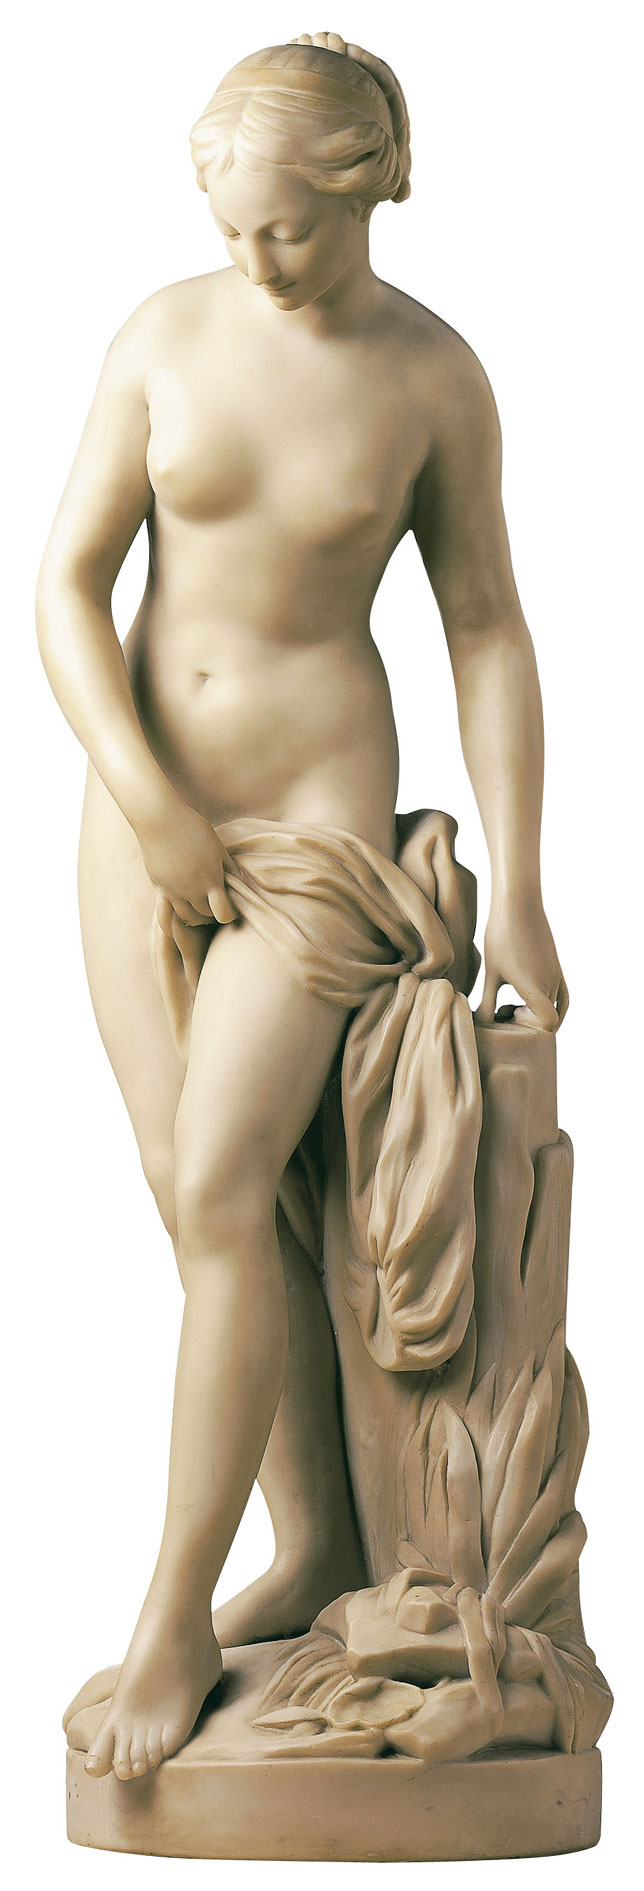 Sculpture "Bathers" (original size), artificial marble by Etienne-Maurice Falconet